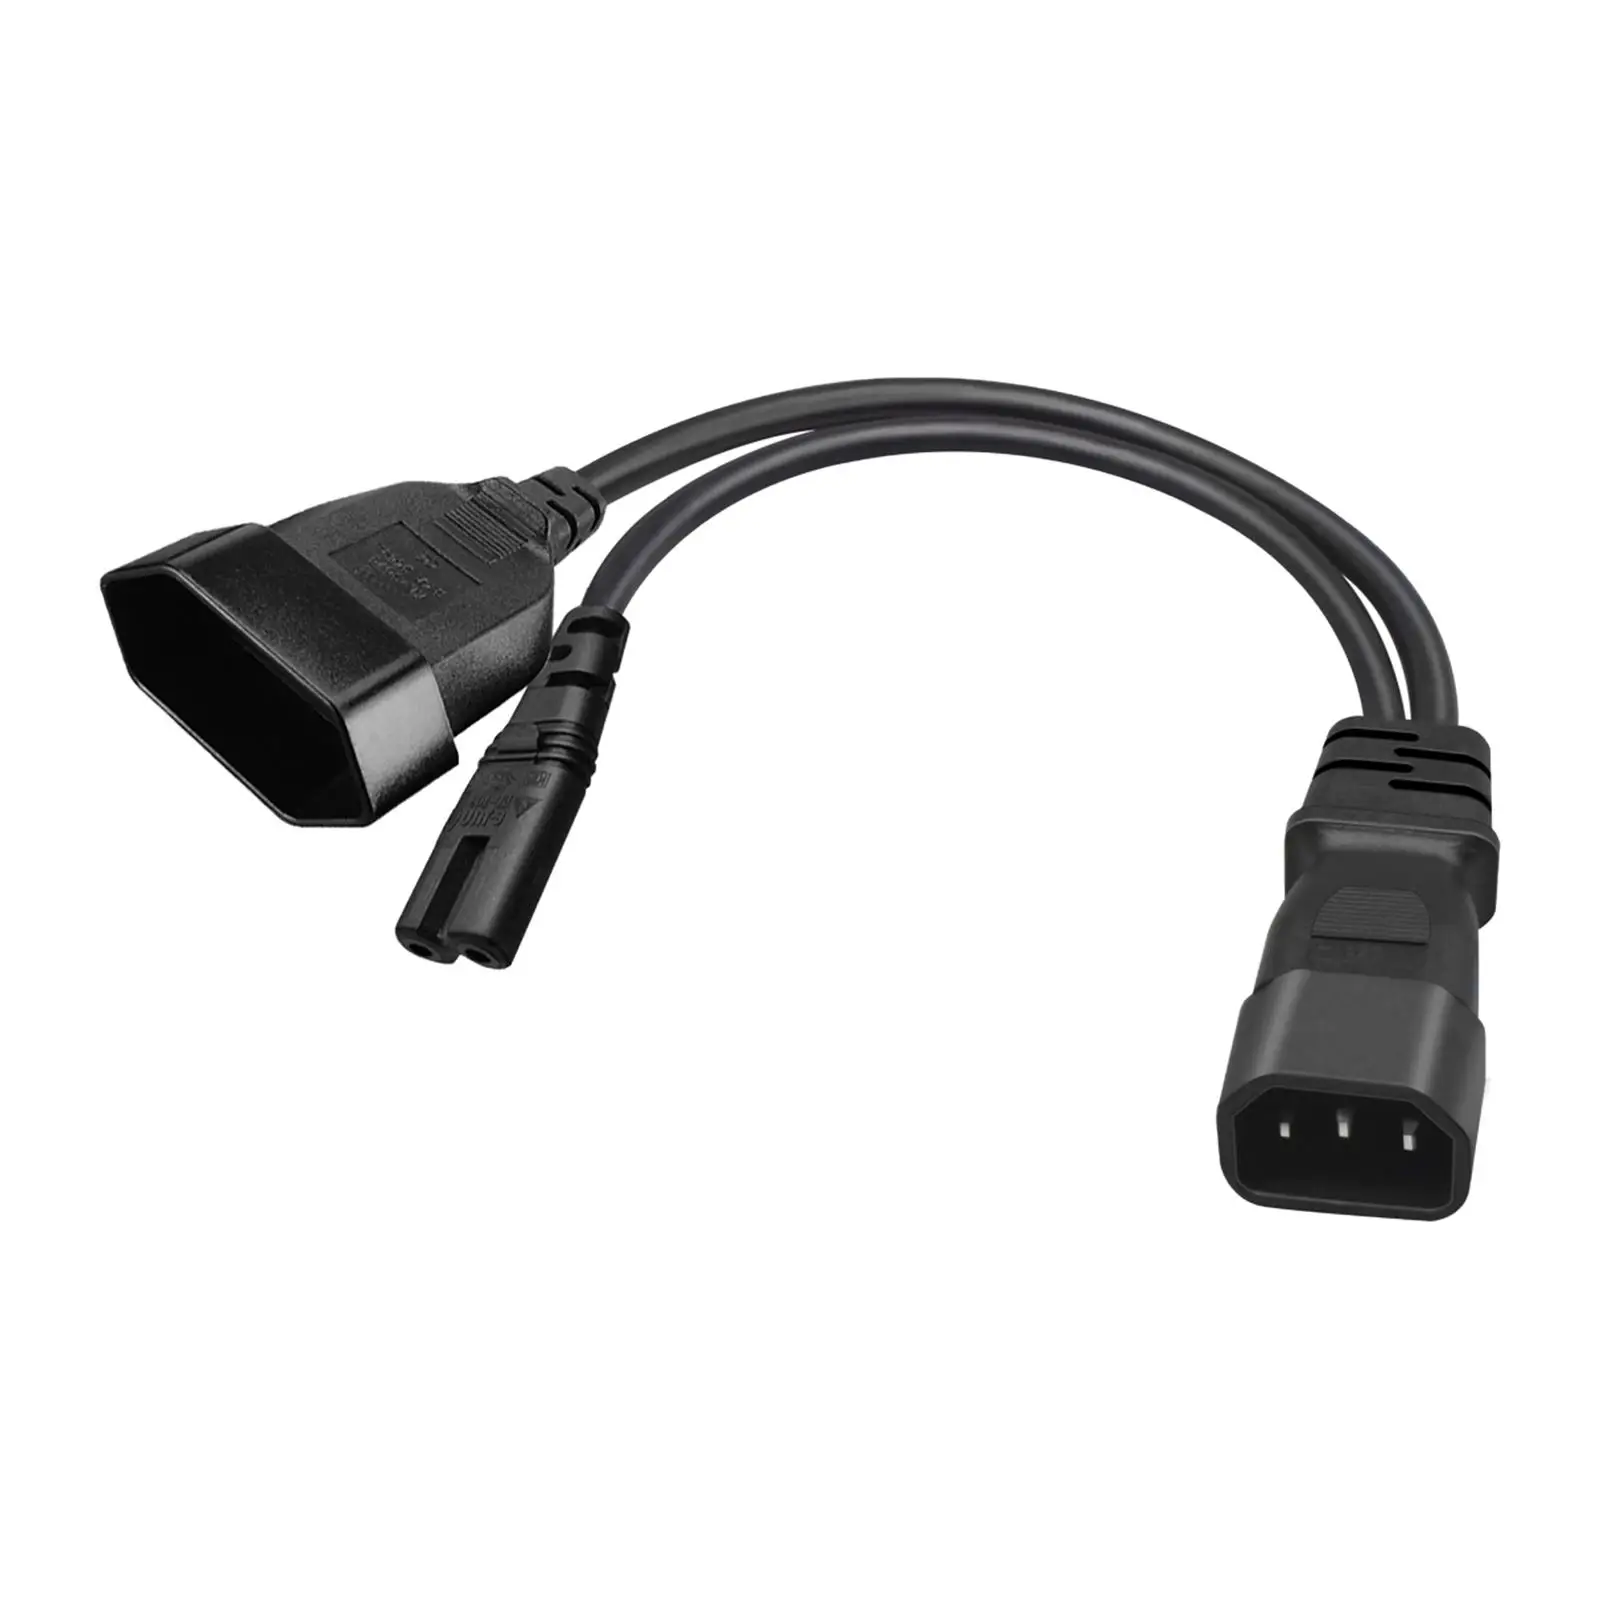 IEC 320 C14 Male to C7 and EU Y Split Power Adapter Cord 1 Replacement Power Line